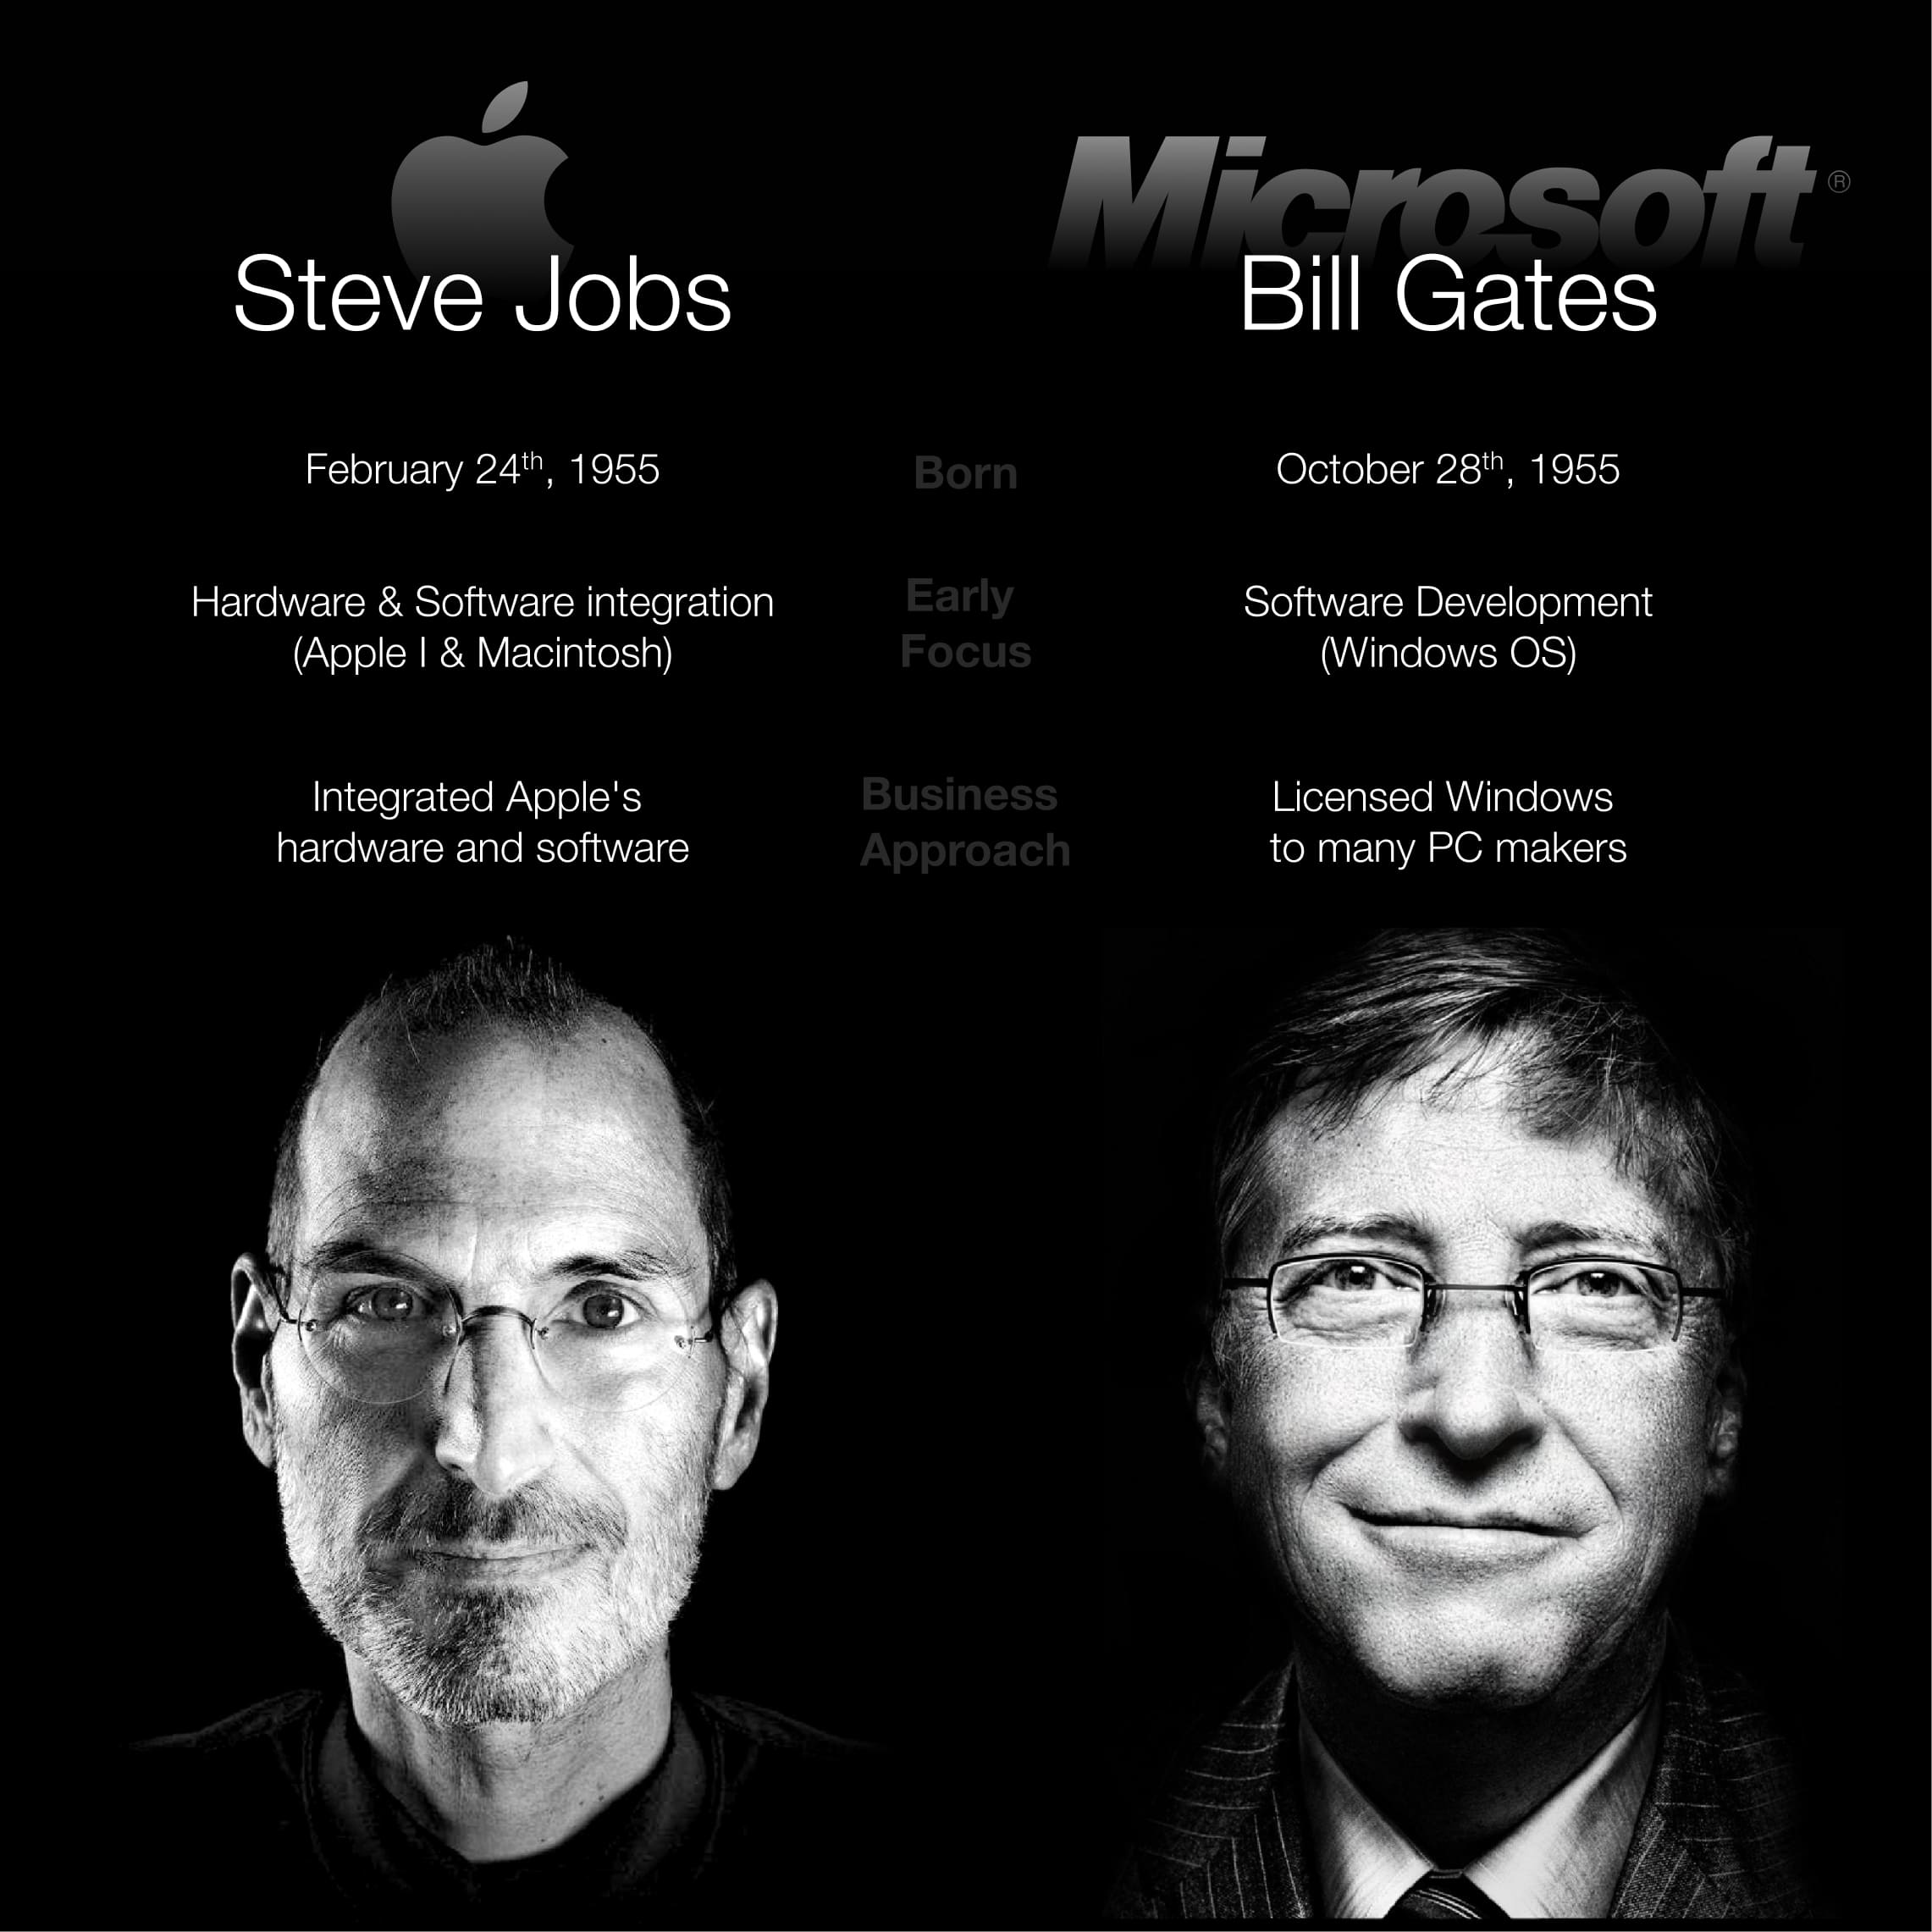 This image is a black and white split graphic that features portraits of Steve Jobs on the left and Bill Gates on the right, set against their respective company logos, Apple and Microsoft. Above each portrait, their names are presented prominently, "Steve Jobs" above his image and "Bill Gates" above his, with the company logos next to their names. Below the portraits are their birth dates and key information about their business philosophies and strategies. For Steve Jobs: "February 24th, 1955", "Hardware & Software integration (Apple I & Macintosh)" and "Integrated Apple's hardware and software". For Bill Gates: "October 28th, 1955", "Software Development (Windows OS)" and "Licensed Windows to many PC makers". The text and imagery are used to contrast their different focuses and approaches within the technology industry.